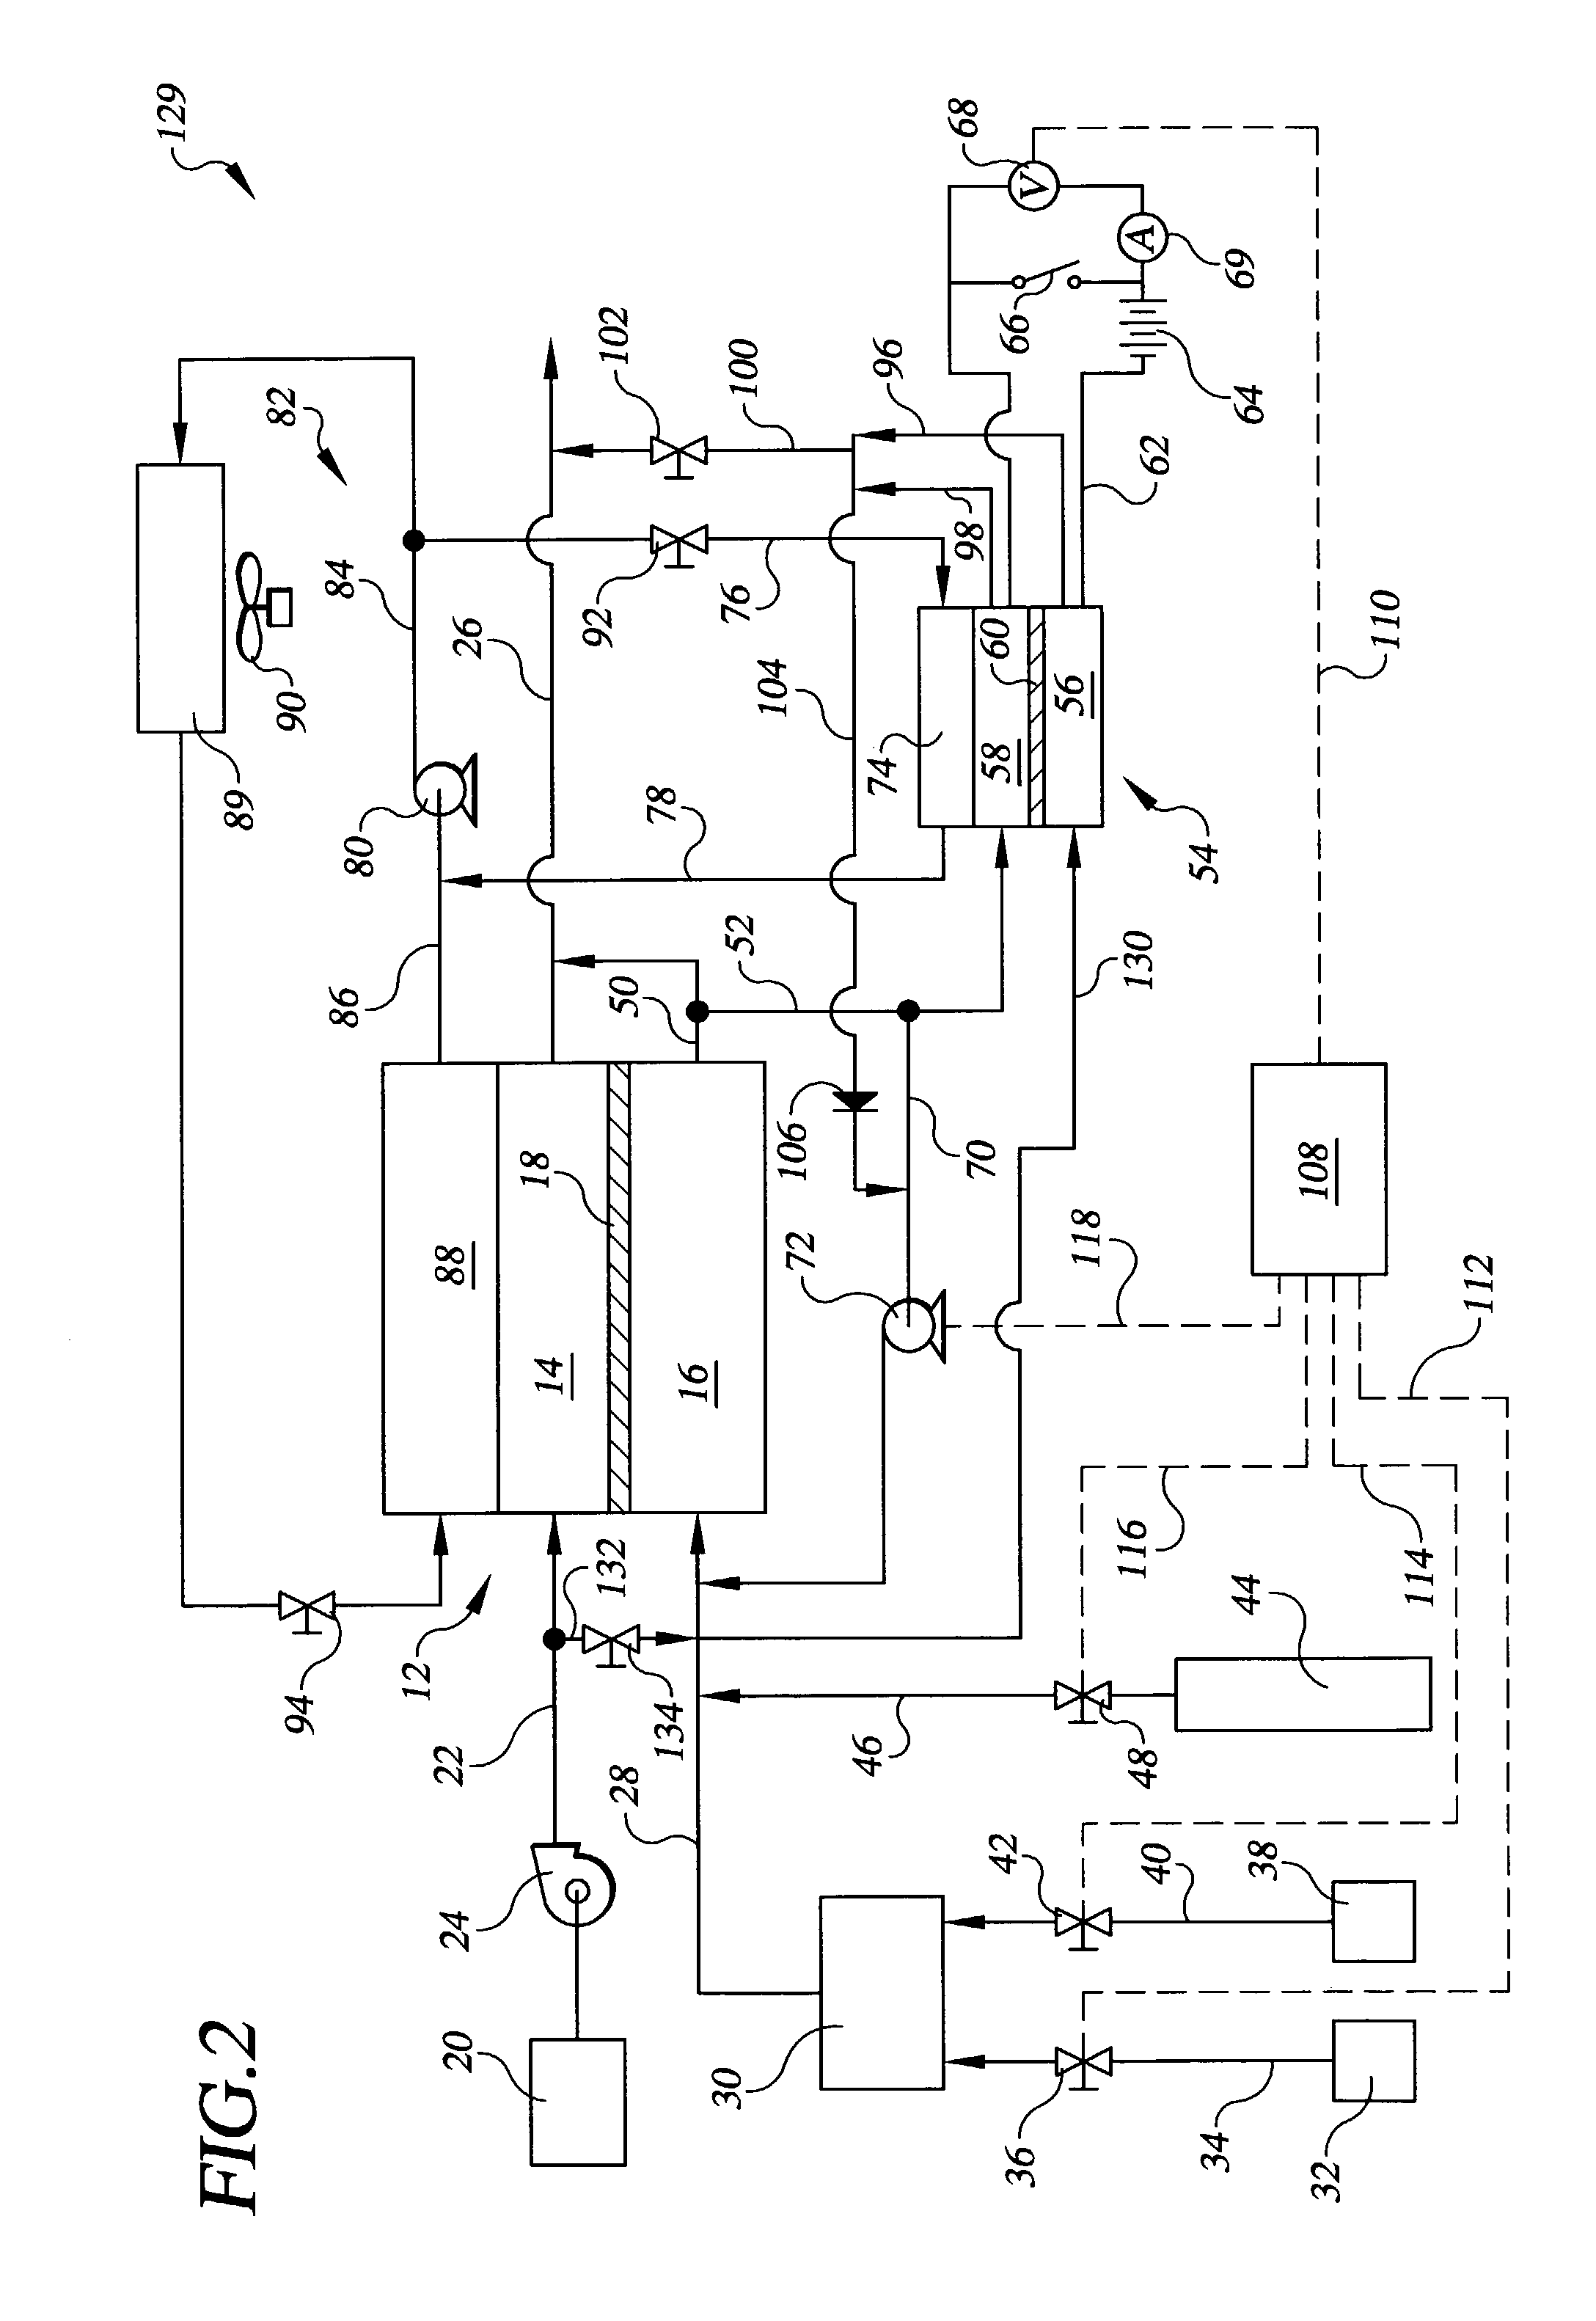 Fuel cell power plant having a fuel concentration sensor cell